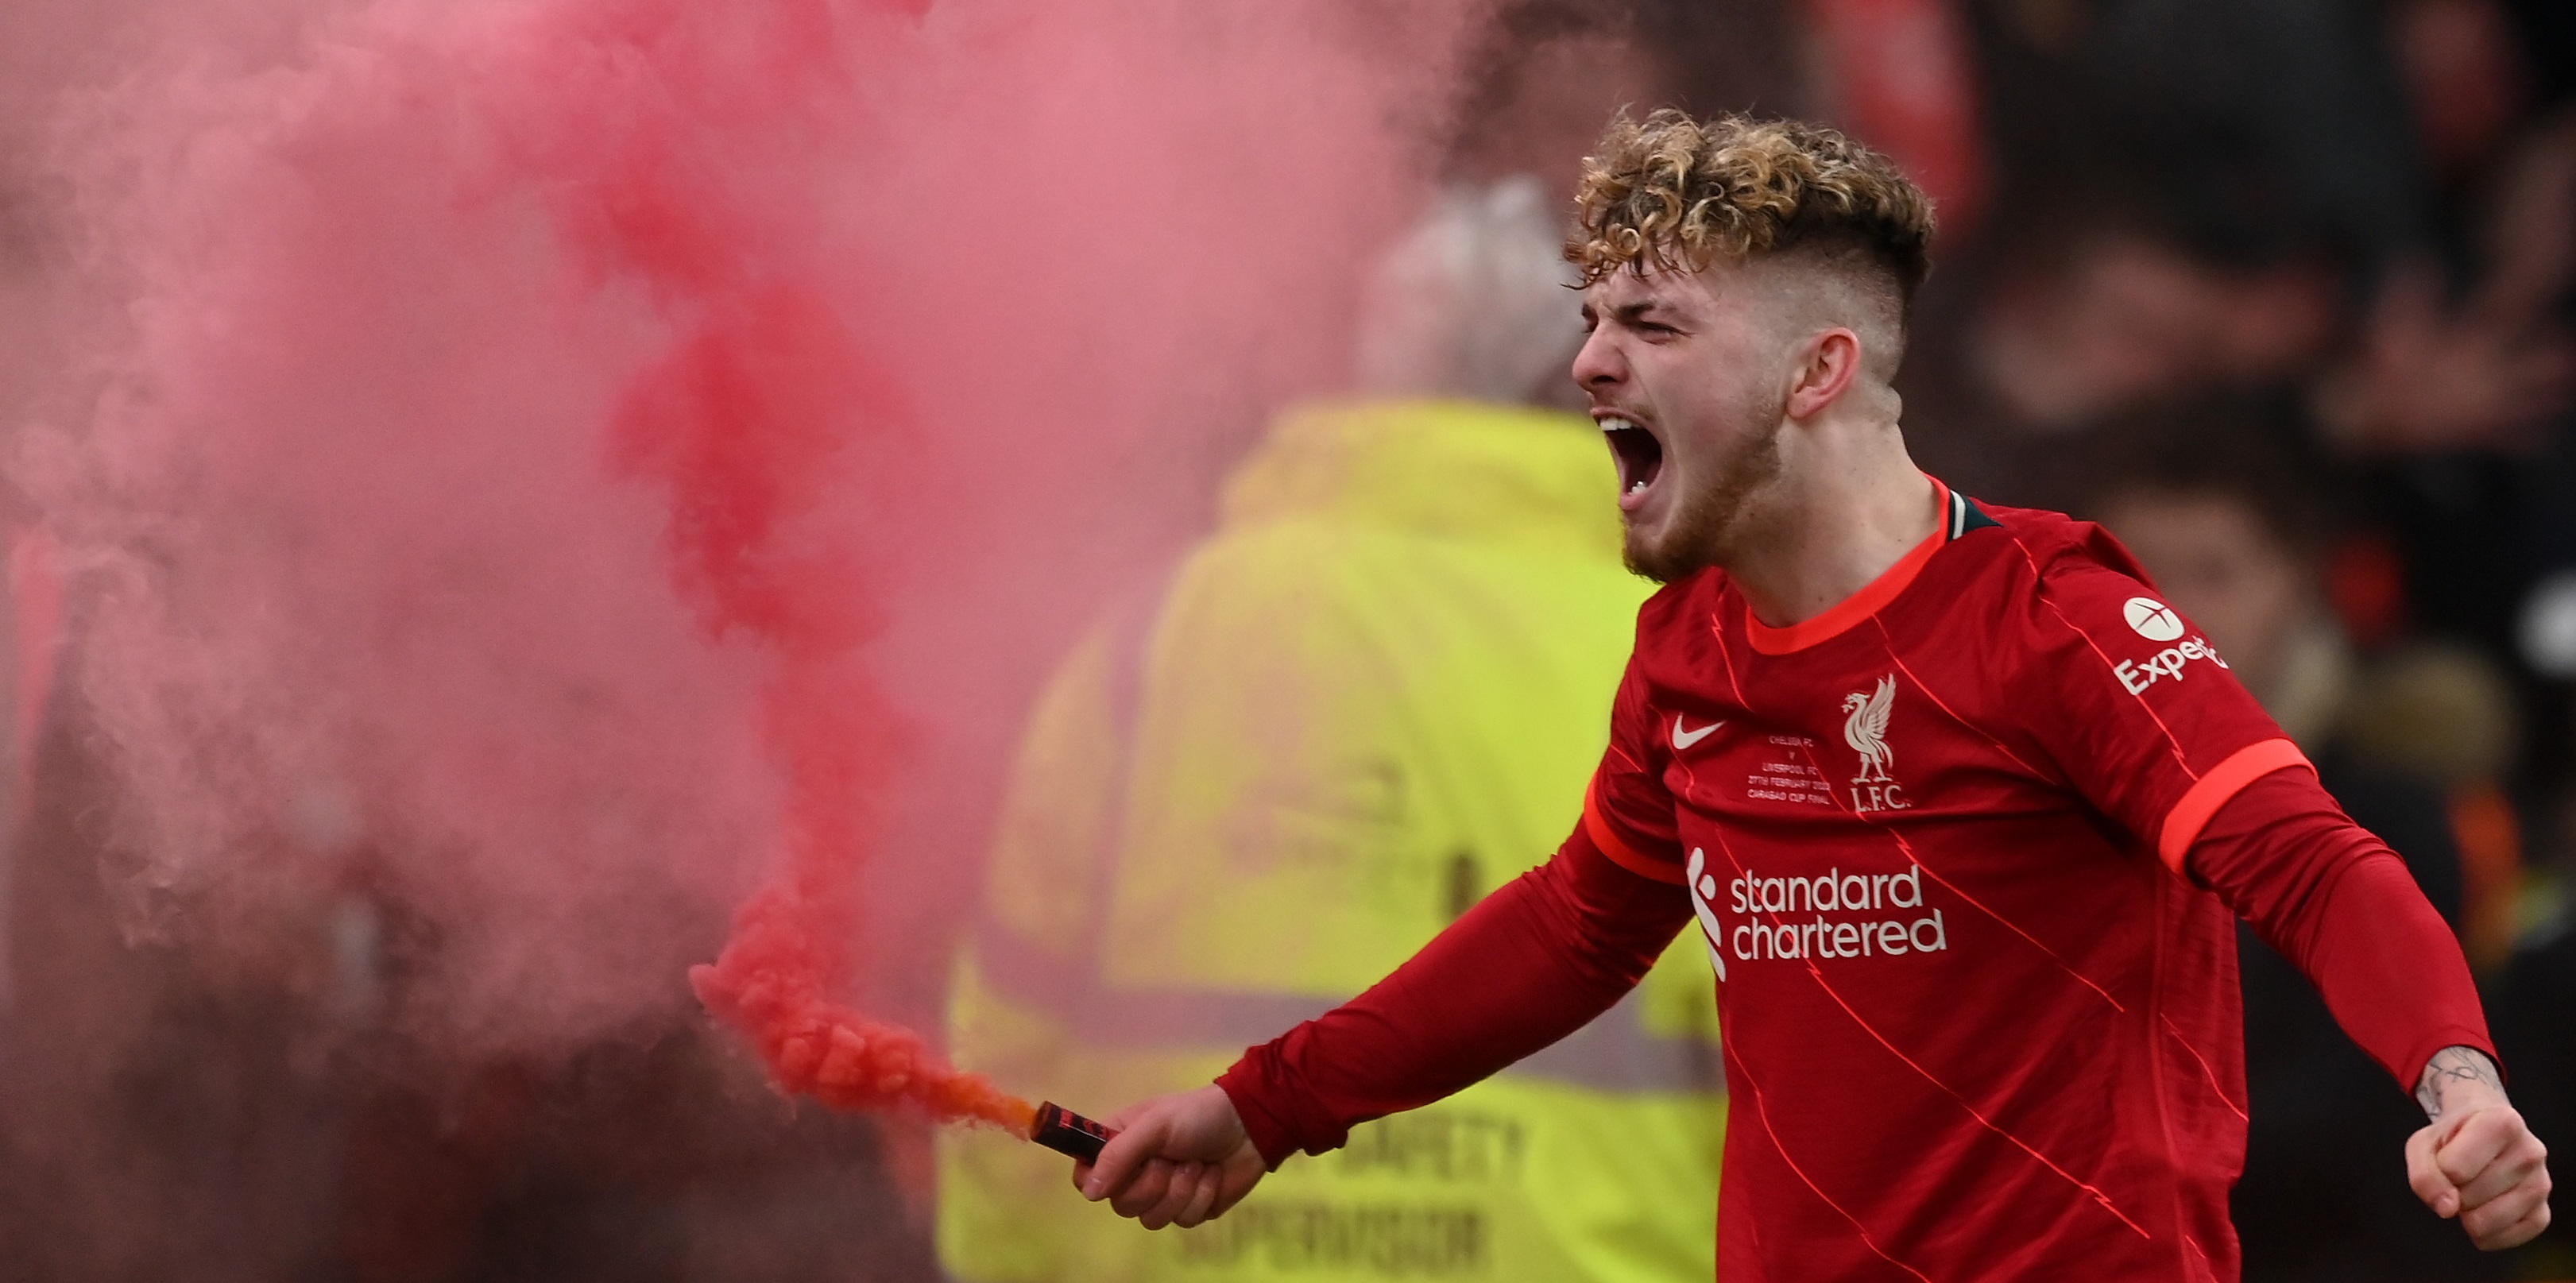 ‘Just let him have some fun’ – Pundit believes Harvey Elliott ‘hard  done by’ after FA wrote to teenager following Carabao Cup flare incident